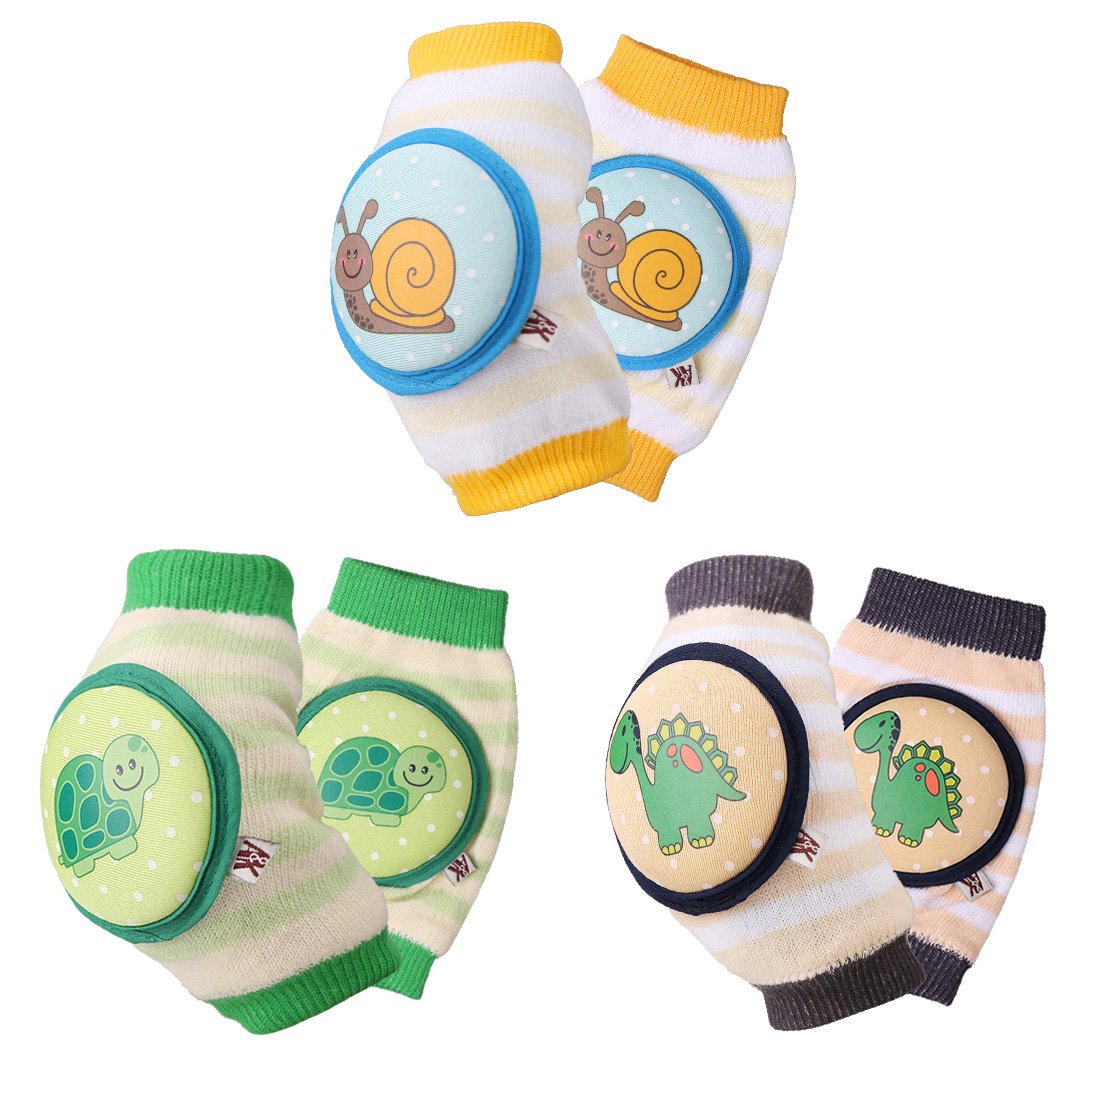 Top 9 Best Baby Knee Pads for Crawling Reviews in 2023 2